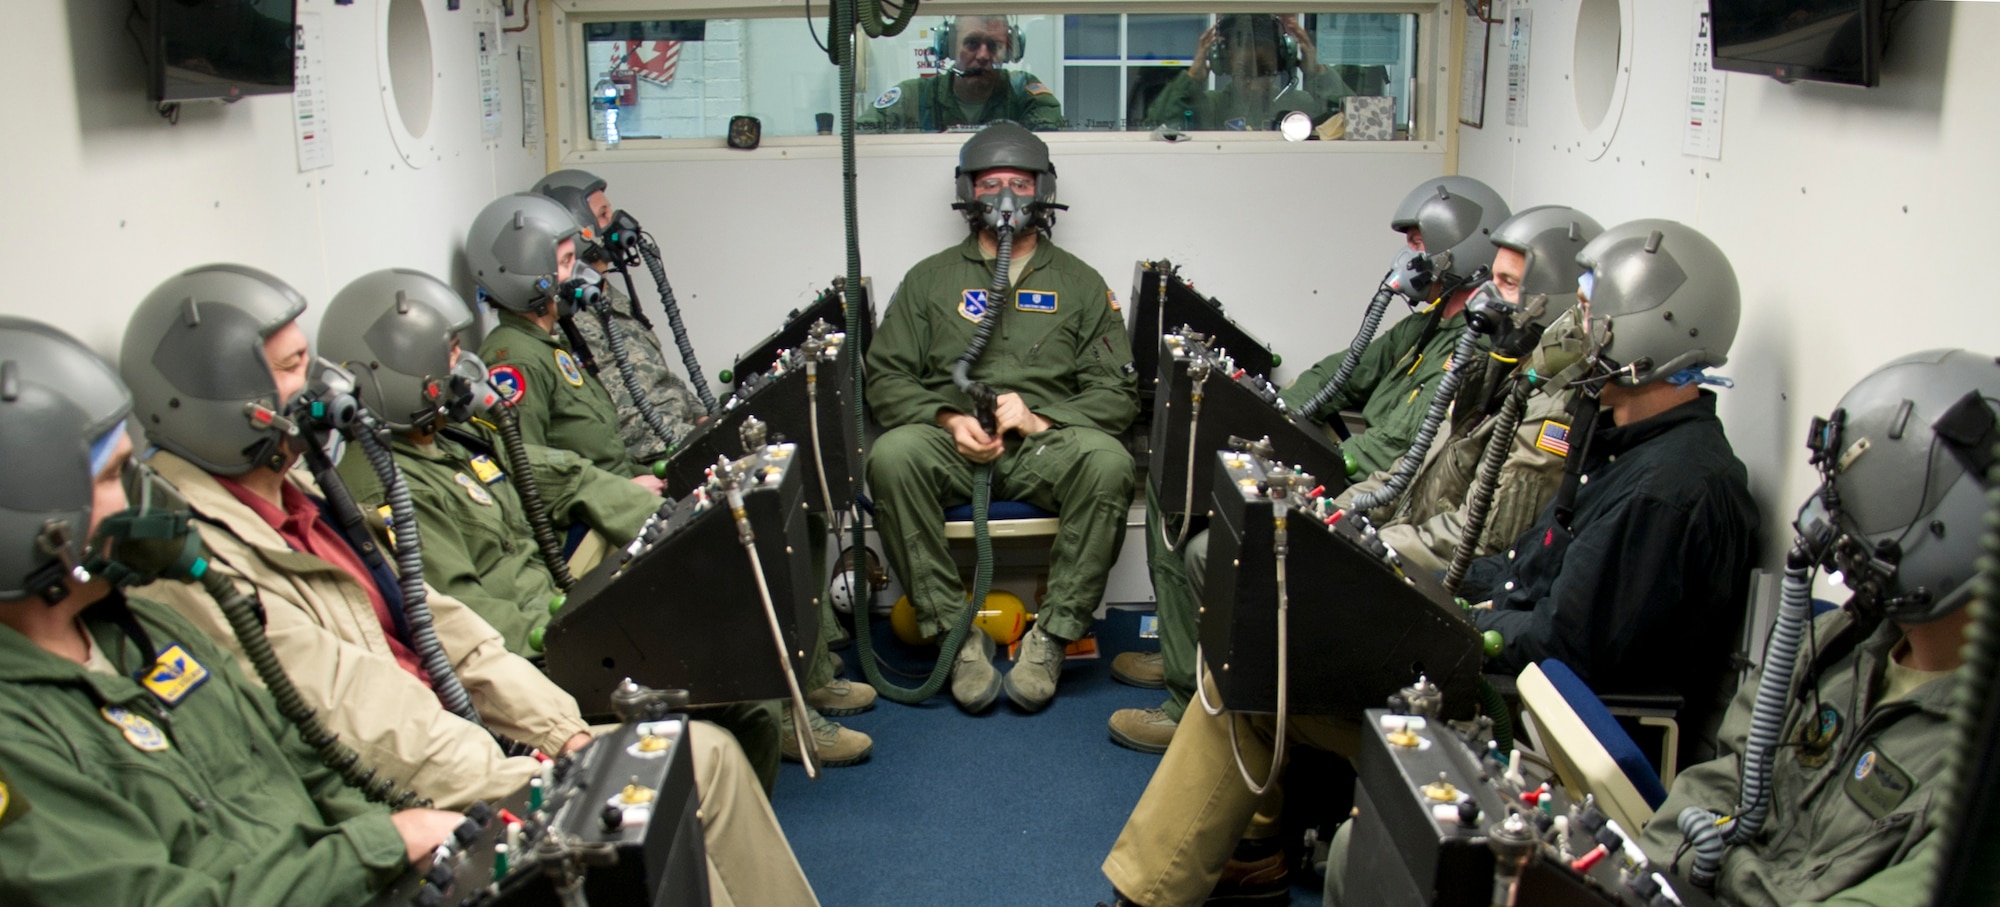 Senior Airman Christopher Connolly (center sitting), 779th Aerospace Medical Squadron physiologist, and students await the beginning of their altitude training course while inside an enclosed chamber March 16, 2017, at Joint Base Andrews, Md. All of the students were undergoing refresher training, required every five years, to test their ability to identify how their bodies reacted in an environment with varying levels of air pressure. (U.S. Air Force photo by Staff Sgt. Joe Yanik)